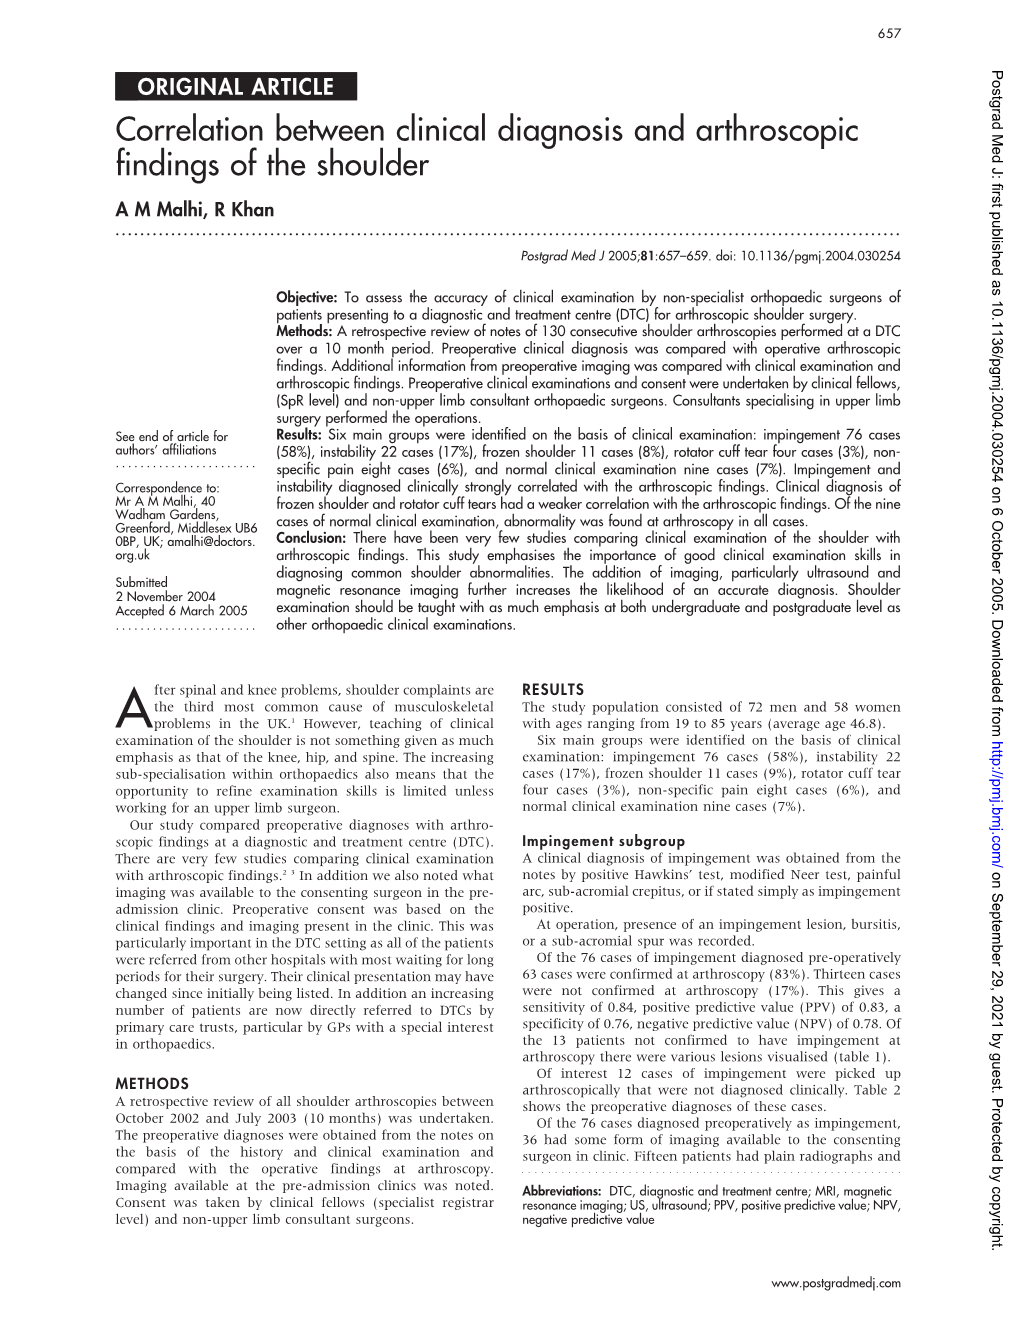 Correlation Between Clinical Diagnosis and Arthroscopic Findings of the Shoulder a M Malhi, R Khan